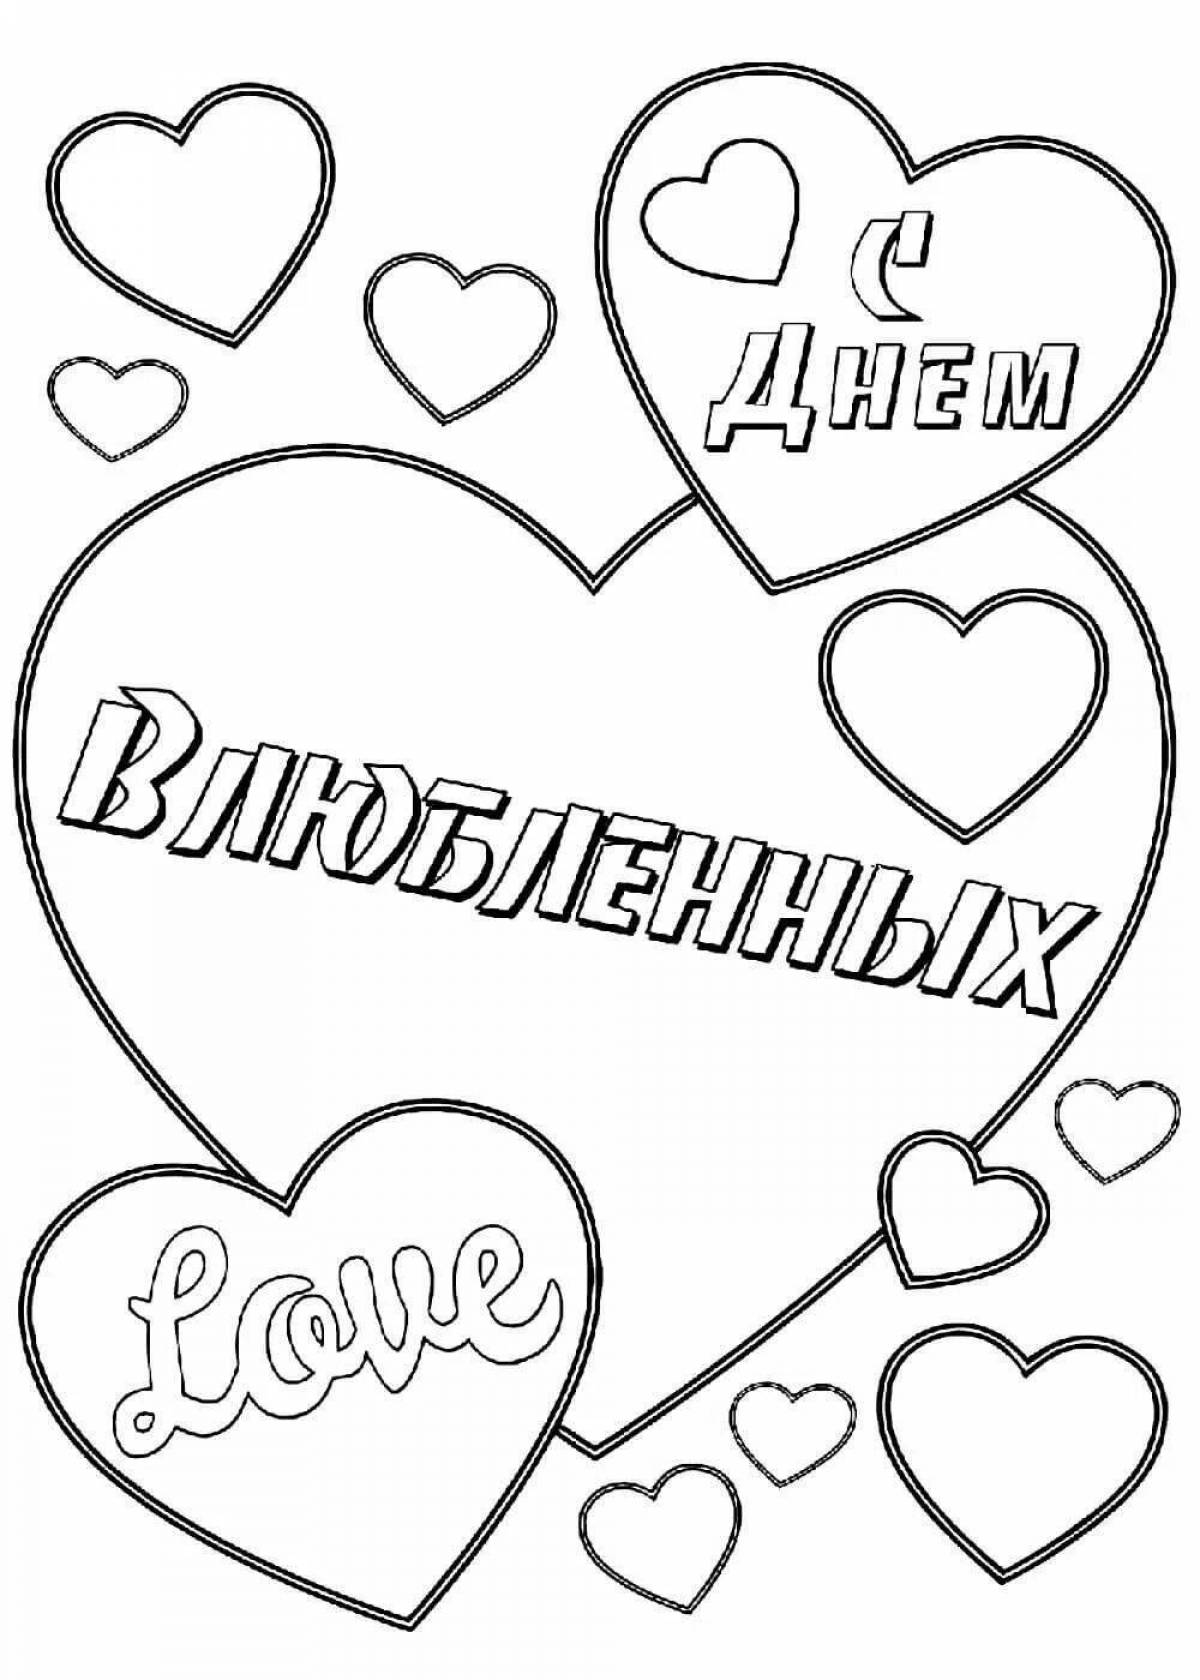 Color-frenzy coloring page valentines на 14 февраля